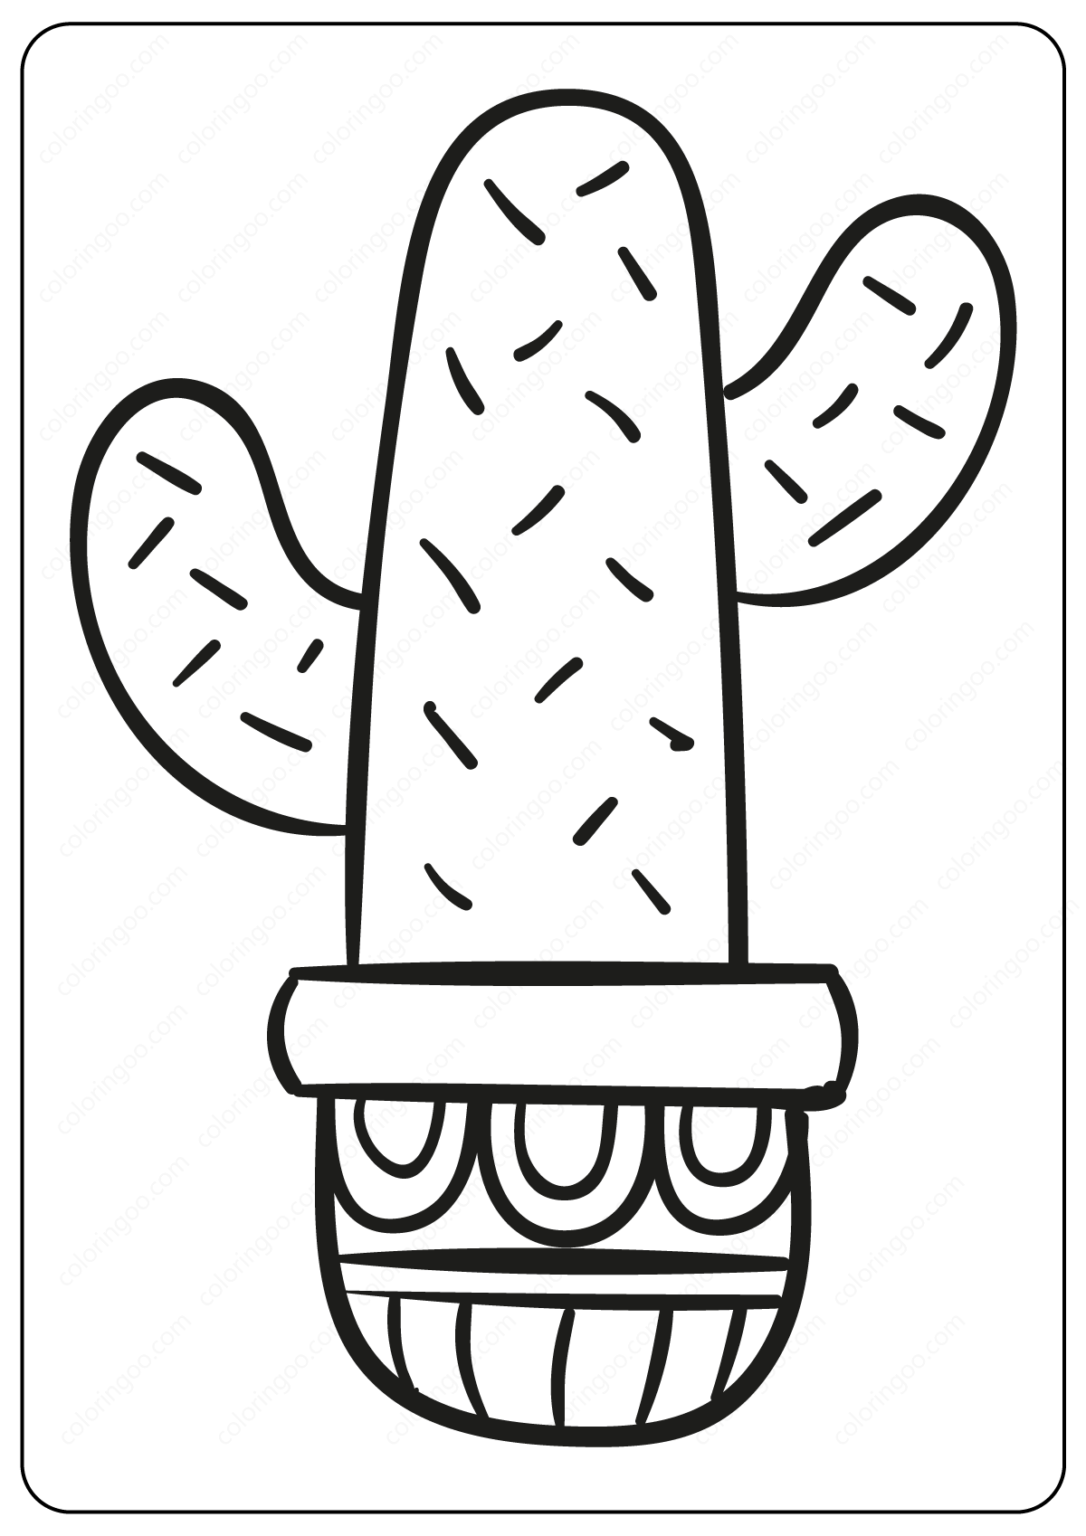 Cactus Sunset Coloring Page Coloring Pages